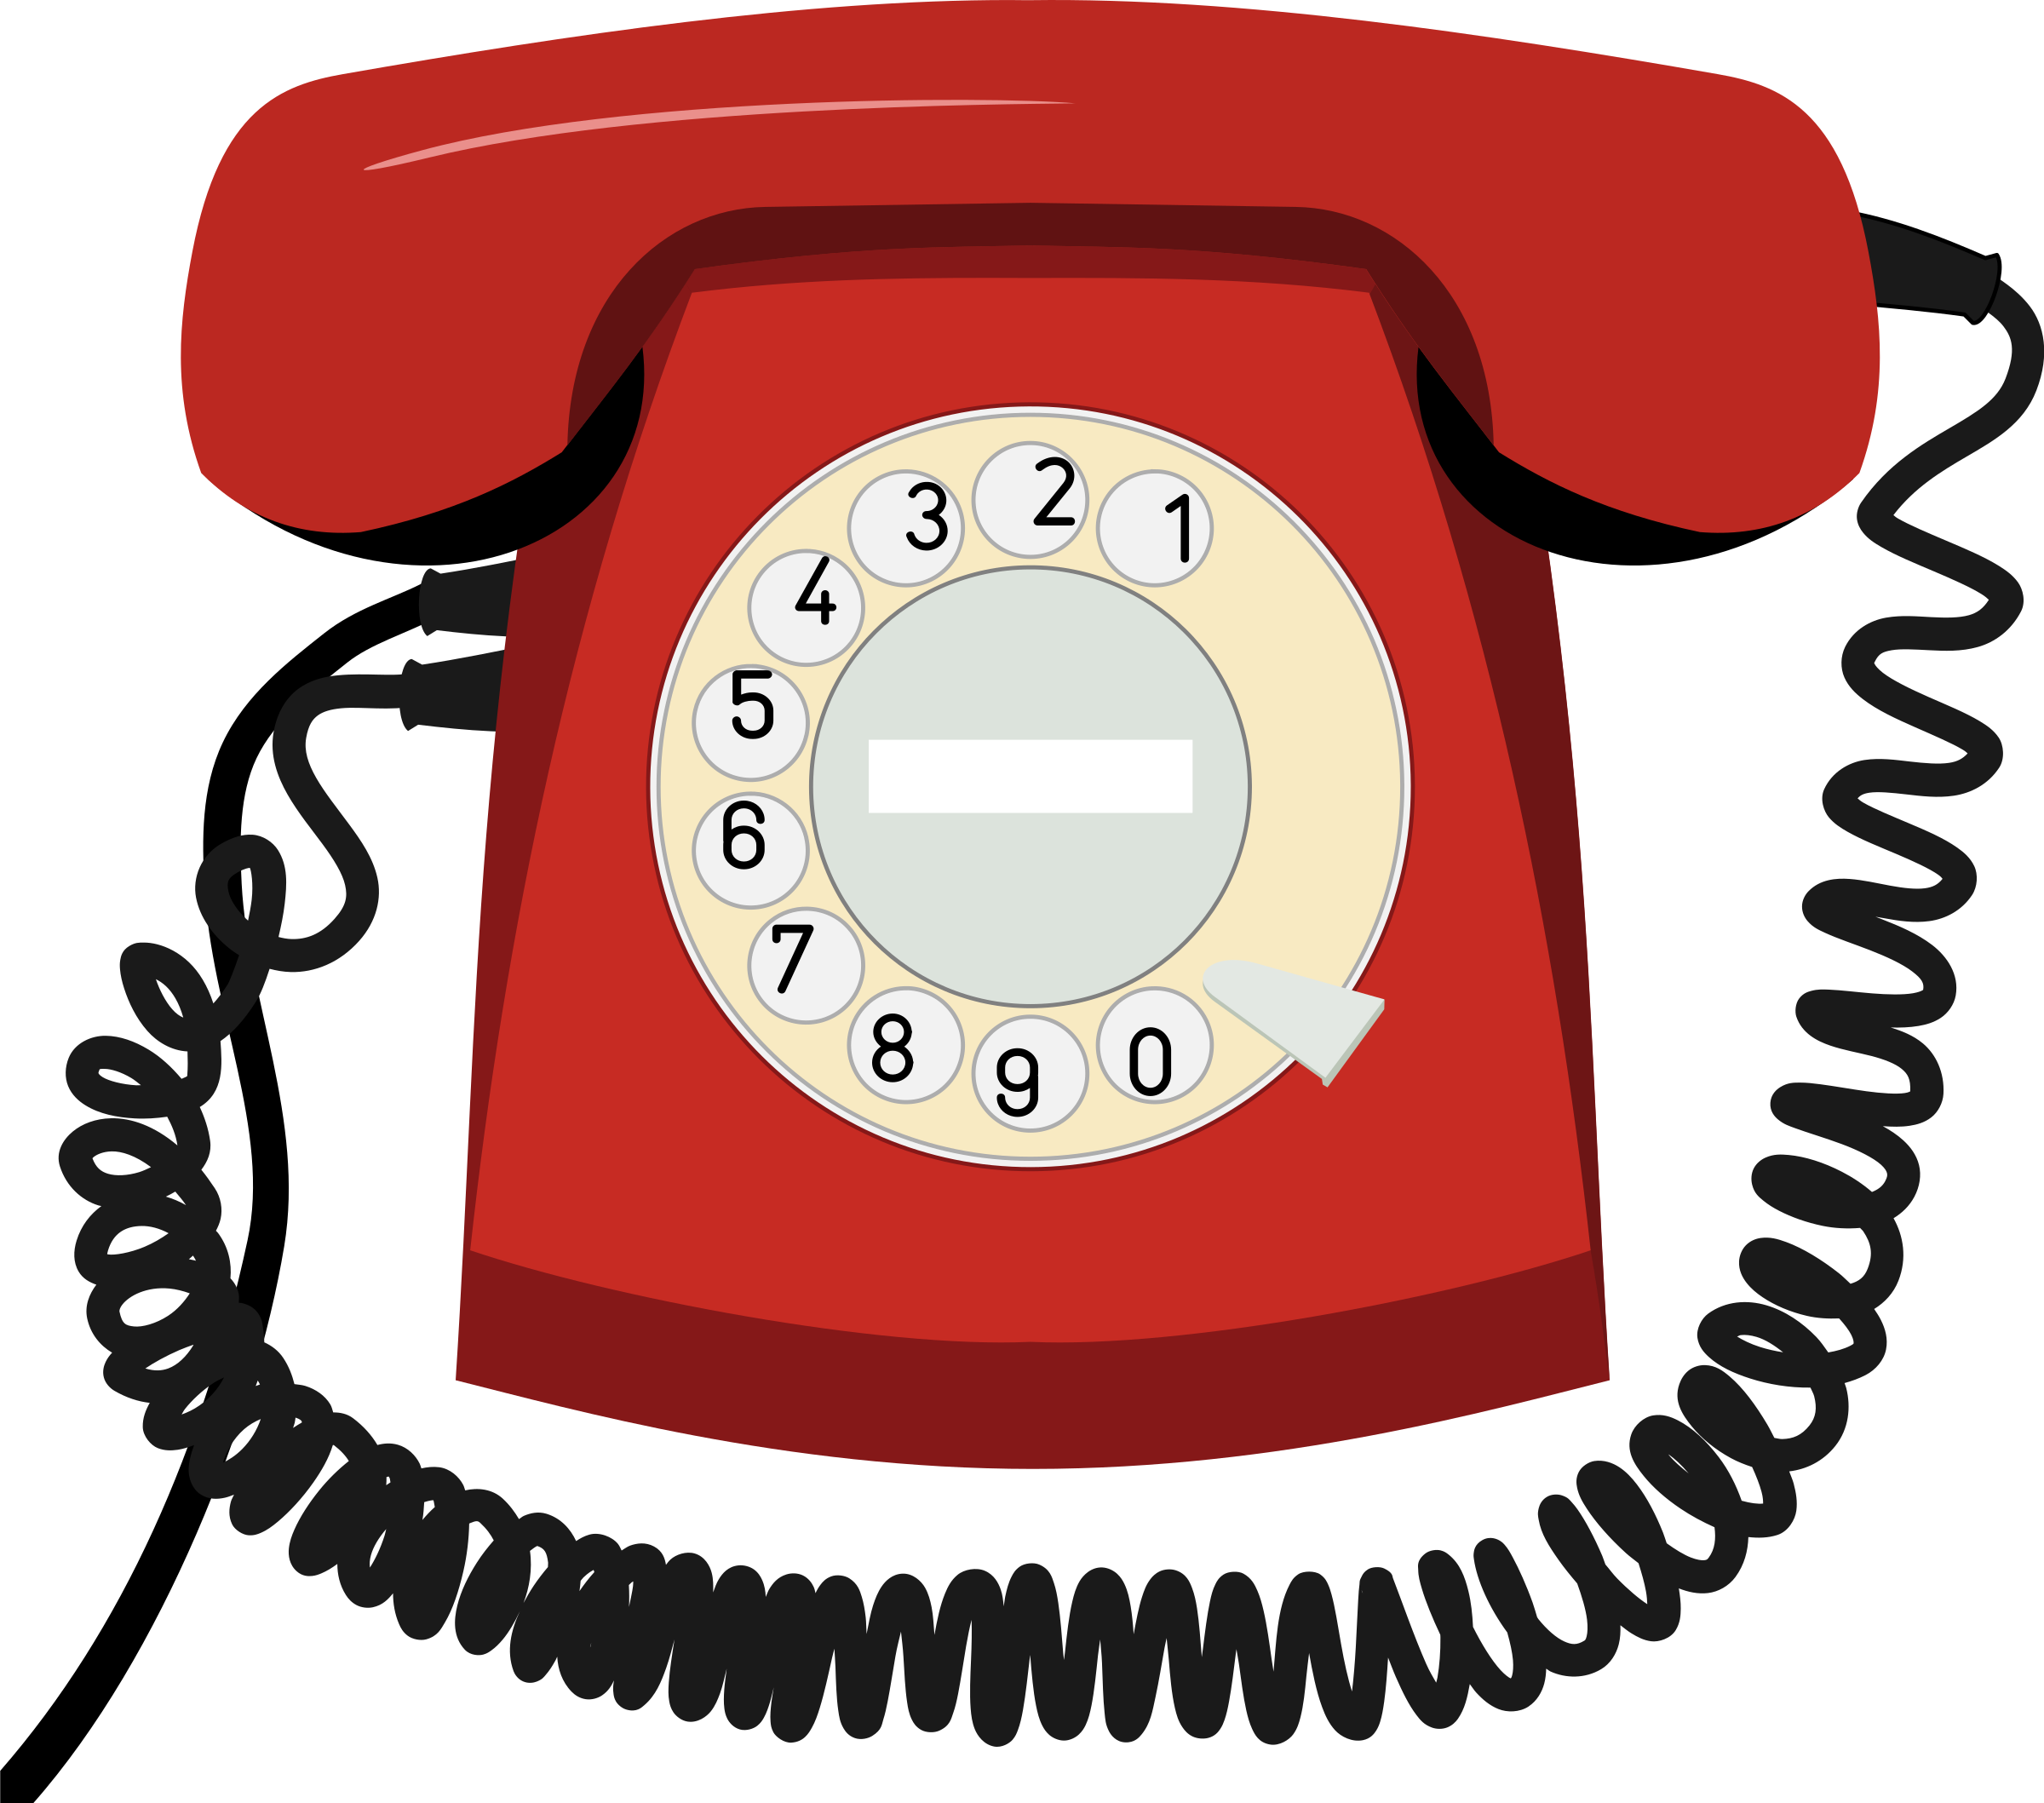 Telephone Clipart - PNG Image #14330